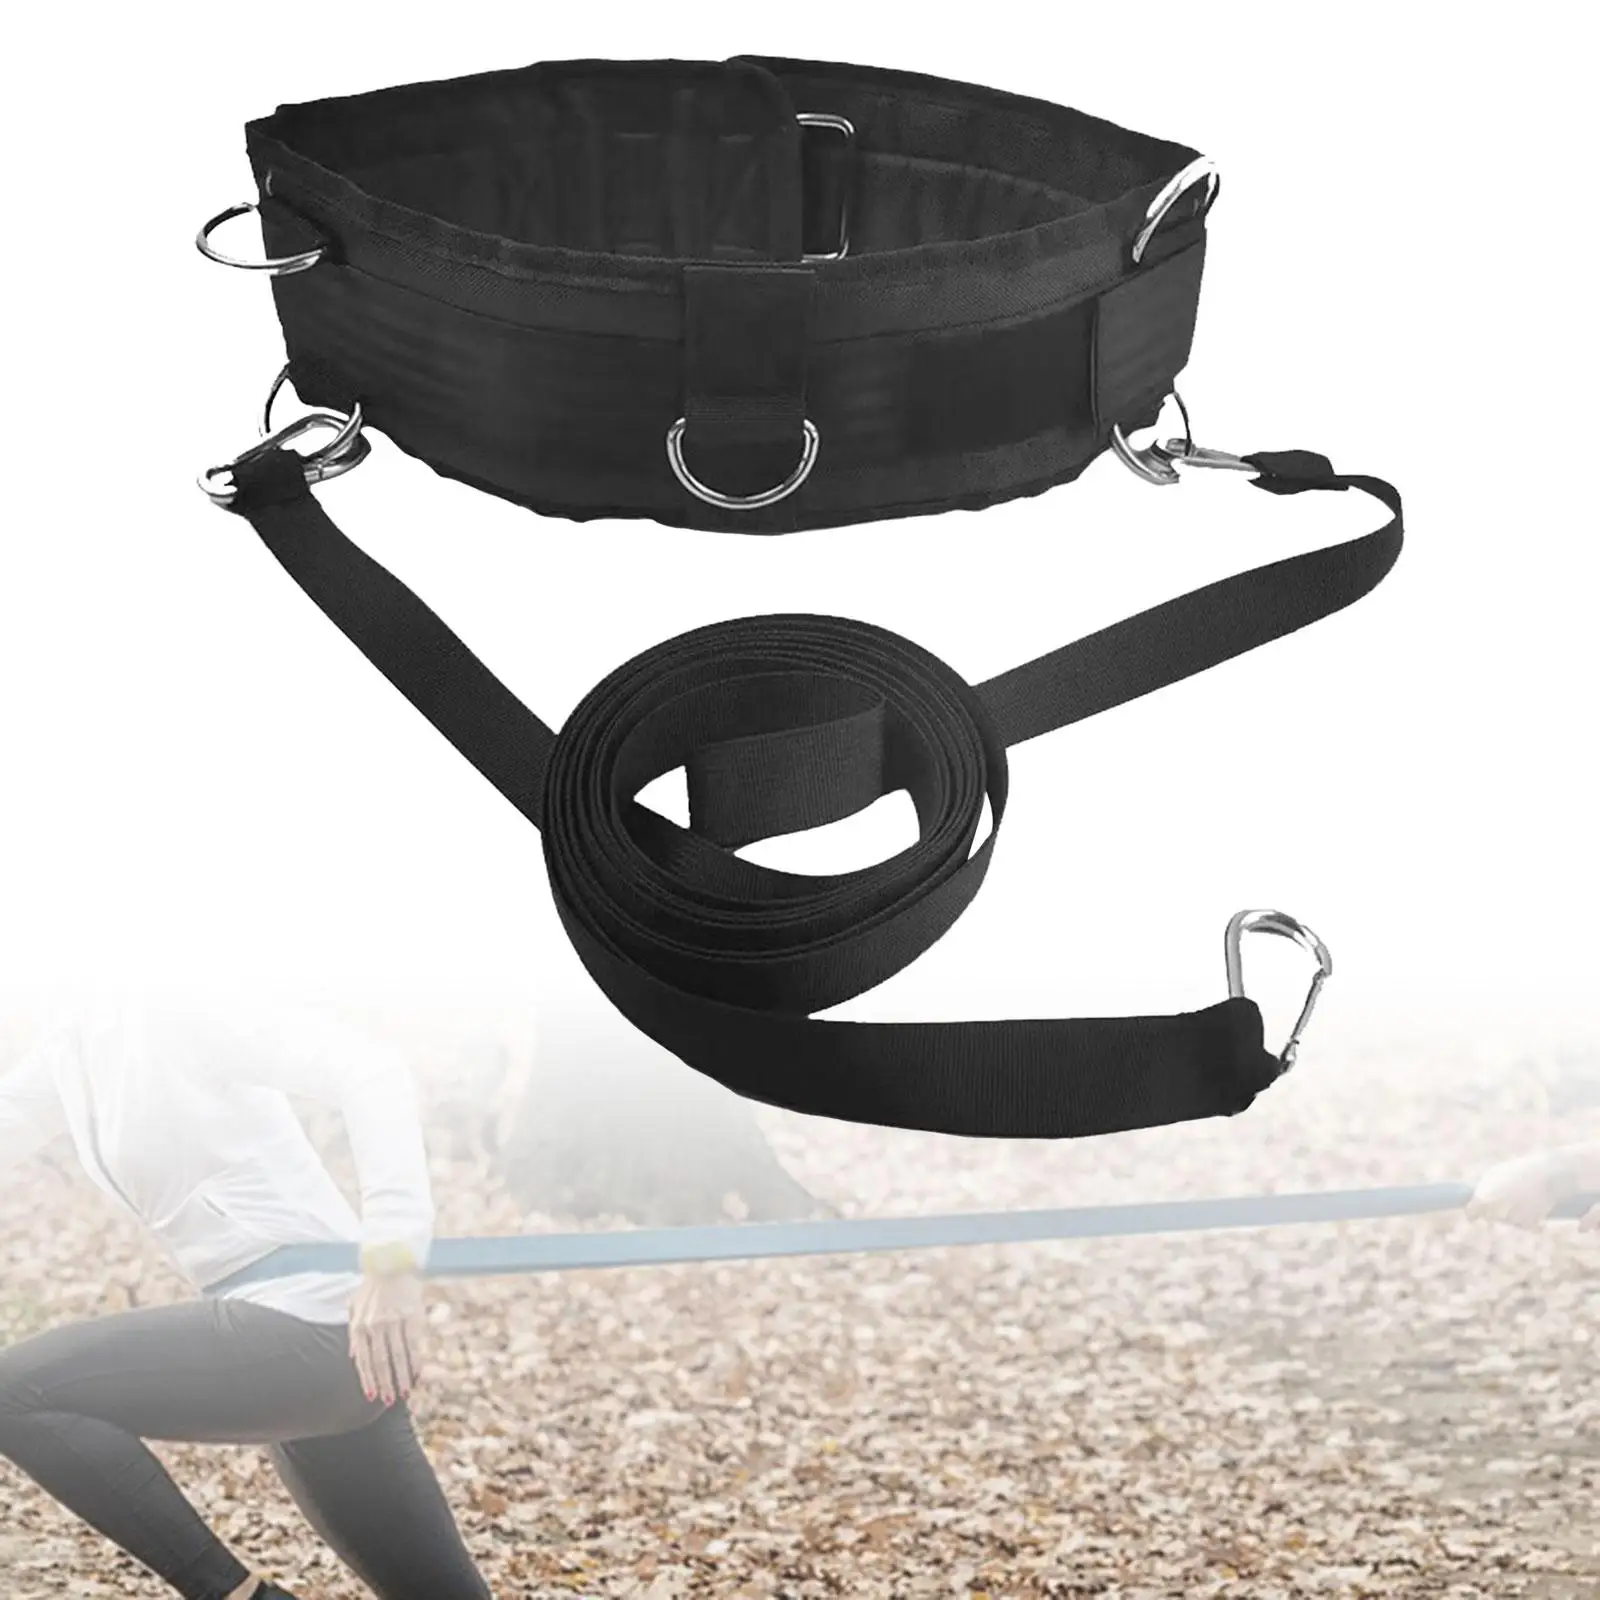 Gym Pulley Strap with Rings Gym Fitness Exercise Waist Belt for Pulling Sled